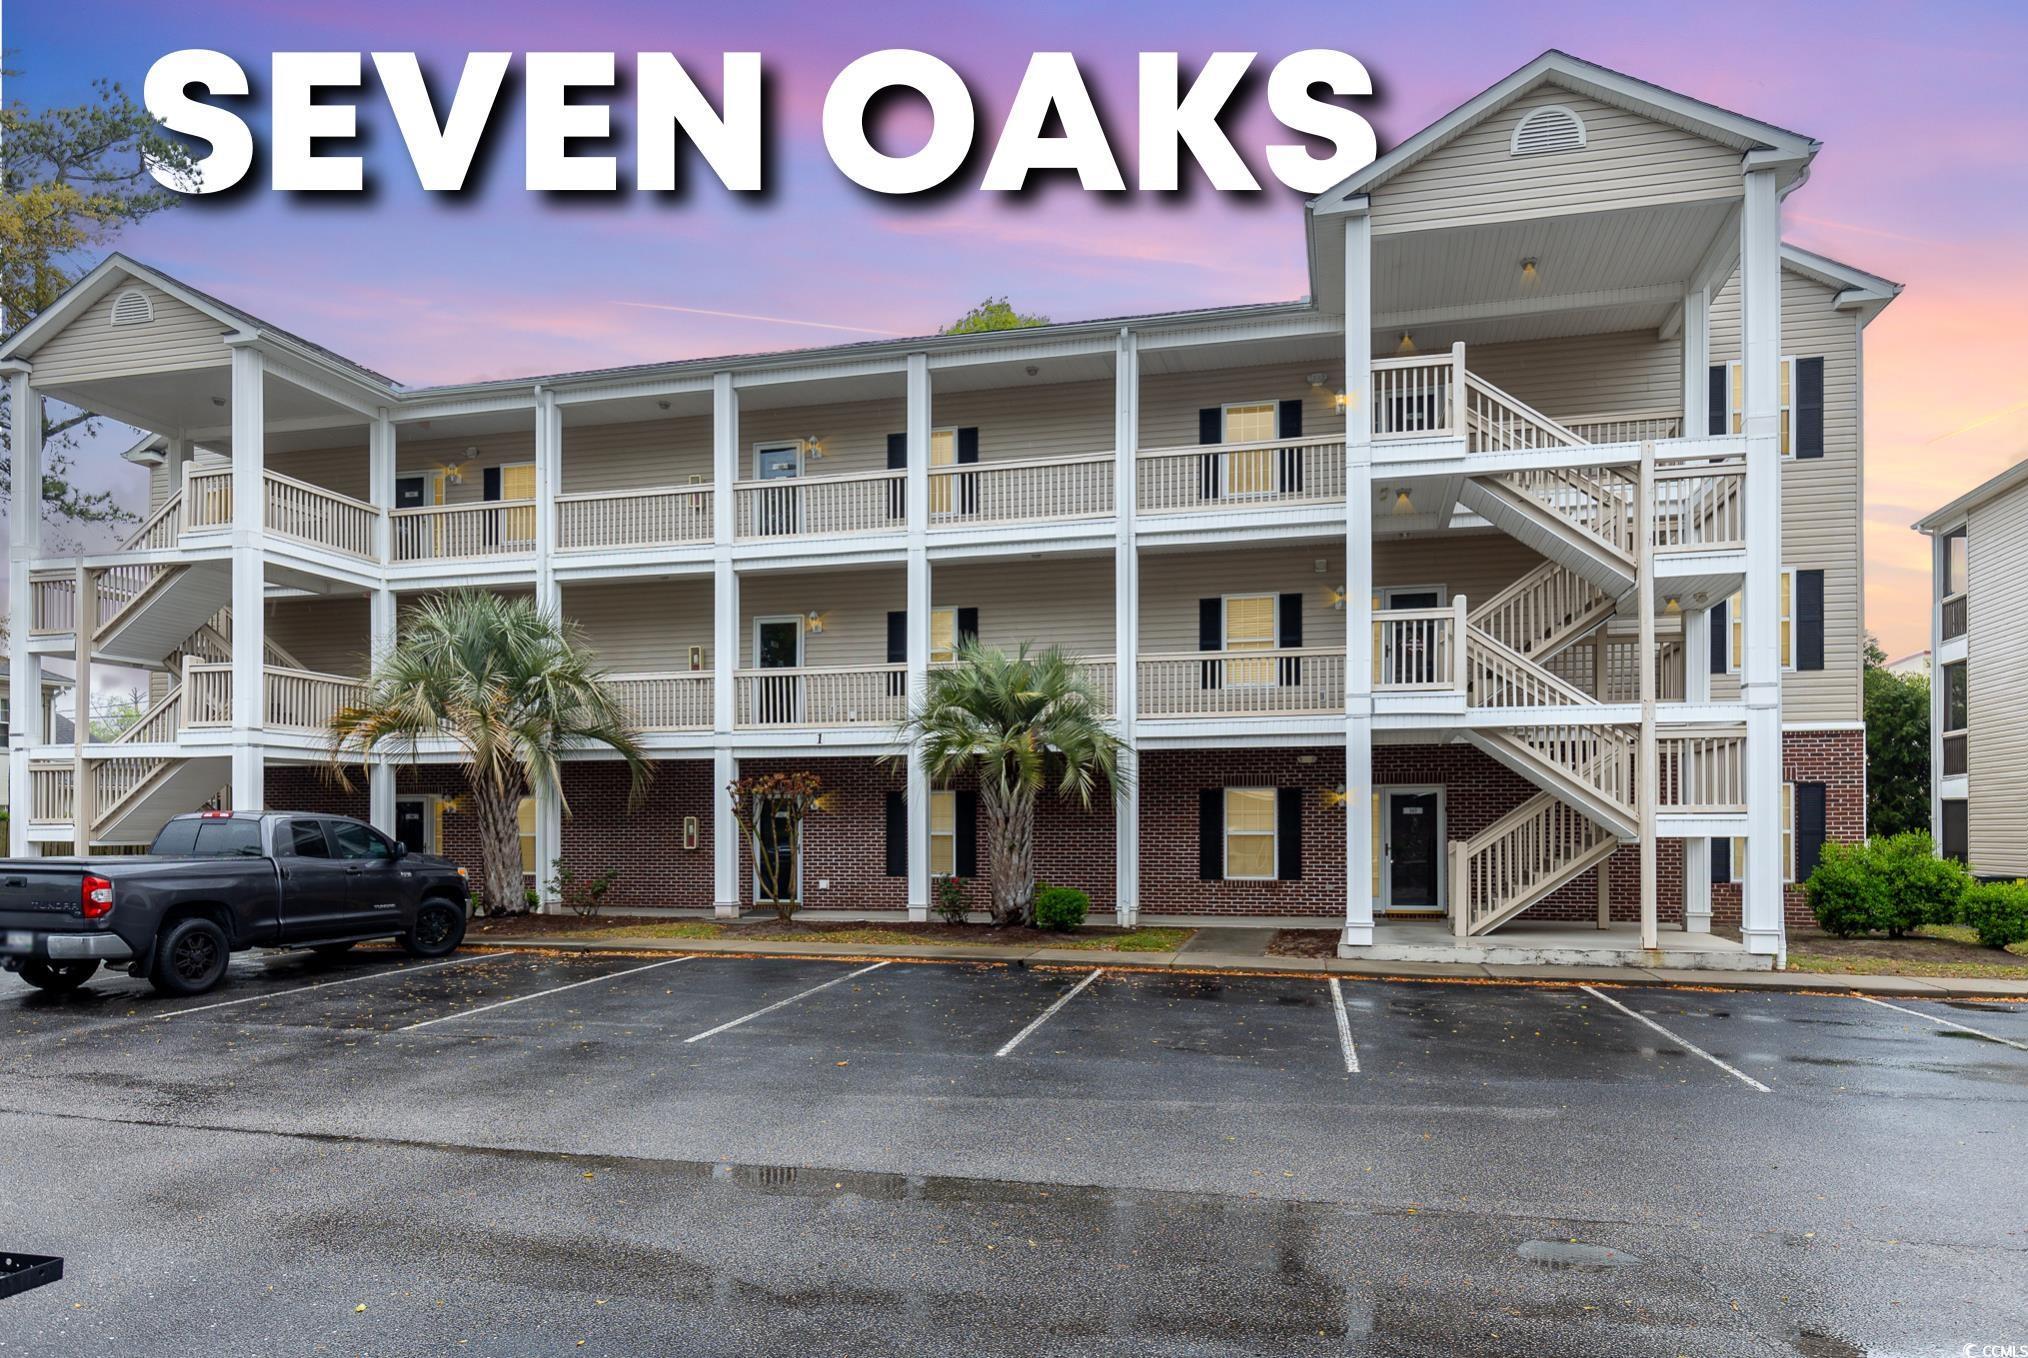 Photo one of 1058 Sea Mountain Hwy. # 1-303 North Myrtle Beach SC 29582 | MLS 2408222